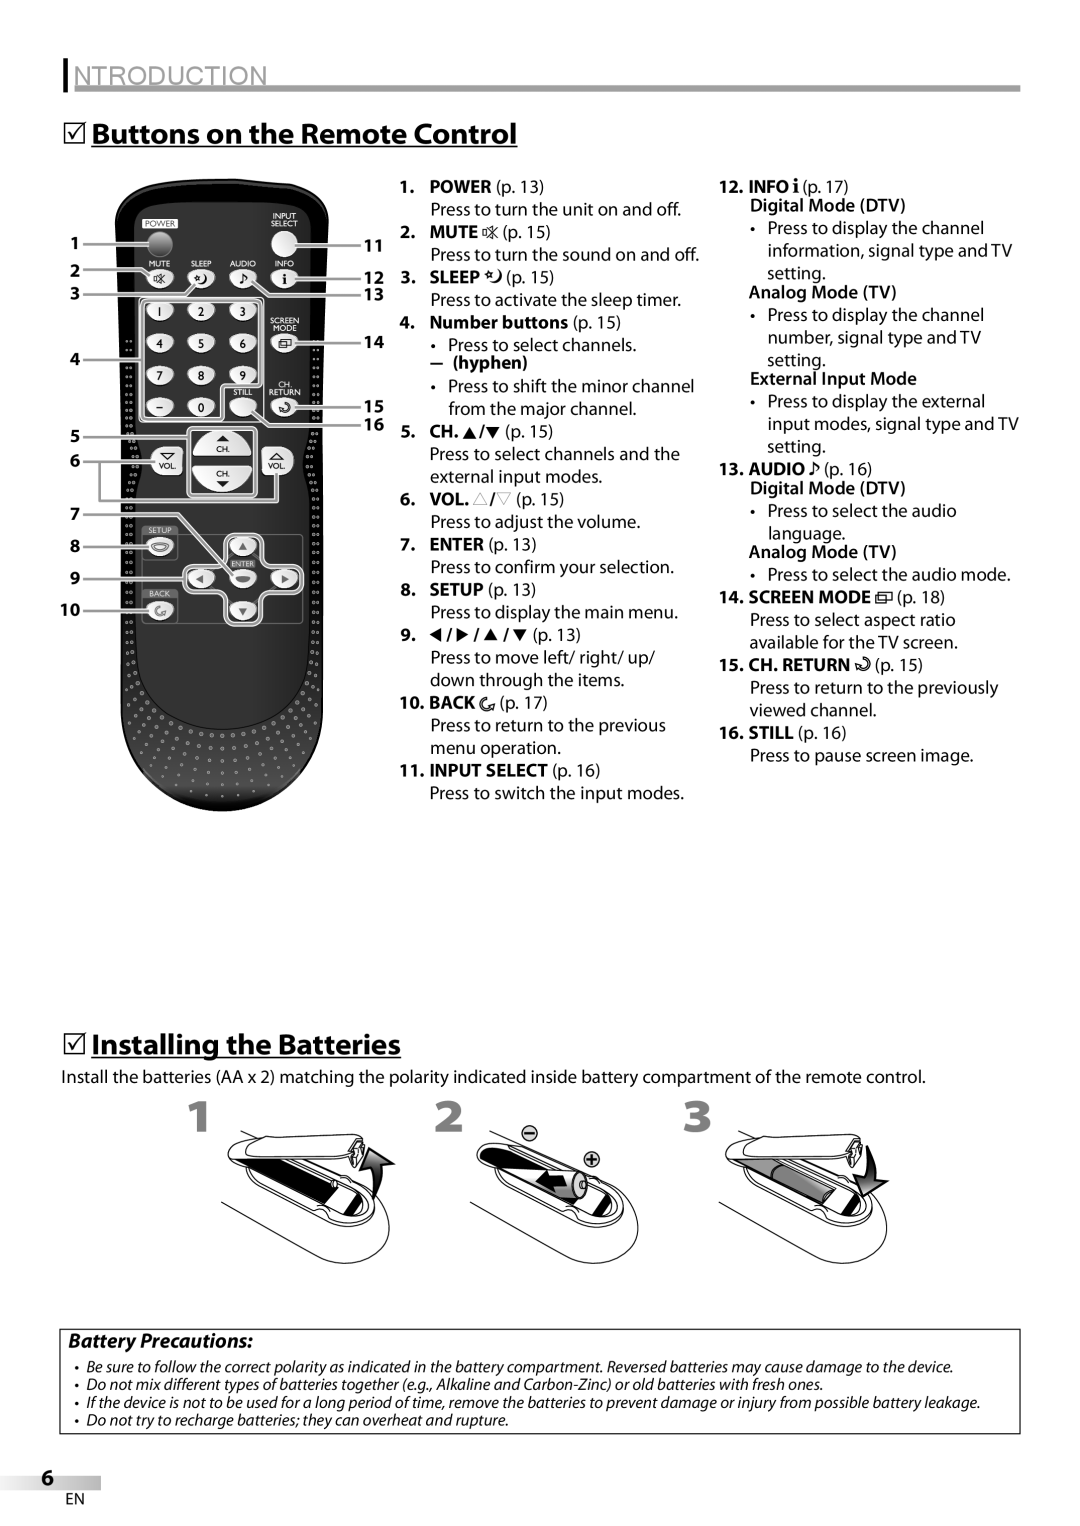 Sylvania LC225SC9 owner manual 5Buttons on the Remote Control, 5Installing the Batteries, Introduction, Battery Precautions 